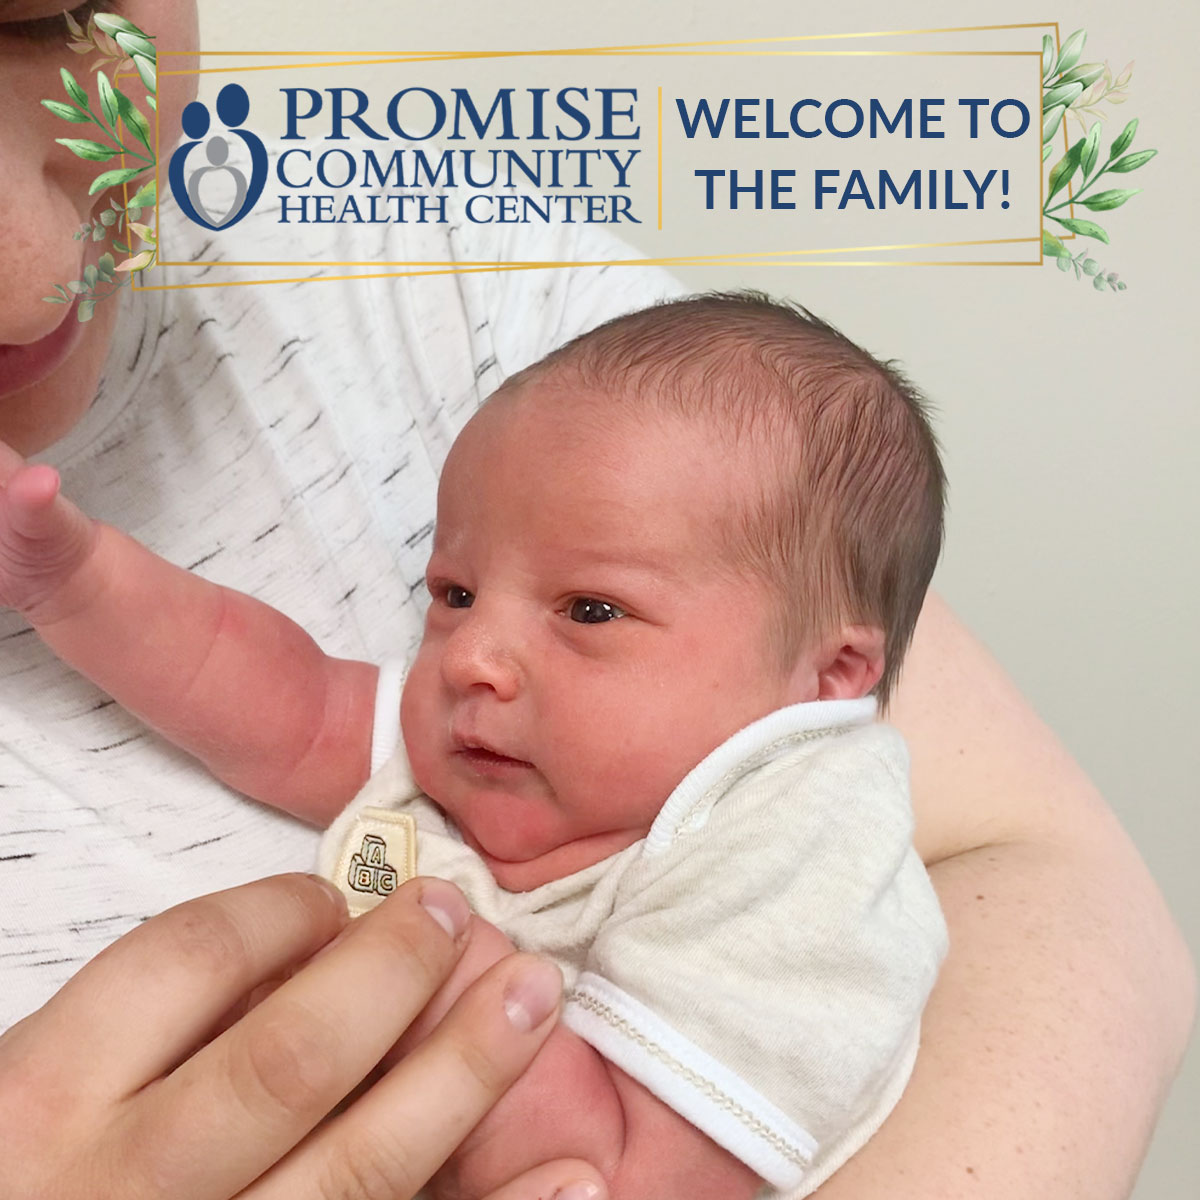 Hospital birth in Sioux Falls, South Dakota |Promise Community Health Center in Sioux Center, Iowa | Home births in northwest Iowa, Home births in southeast South Dakota, Home births in southwest Minnesota | Home births in Sioux Falls South Dakota, Home births in Beresford South Dakota, Home births in Sioux City IA, Home births in LeMars IA, Home births in Worthington MN, Home births in Iowa, Home births in South Dakota, Home births in Minnesota